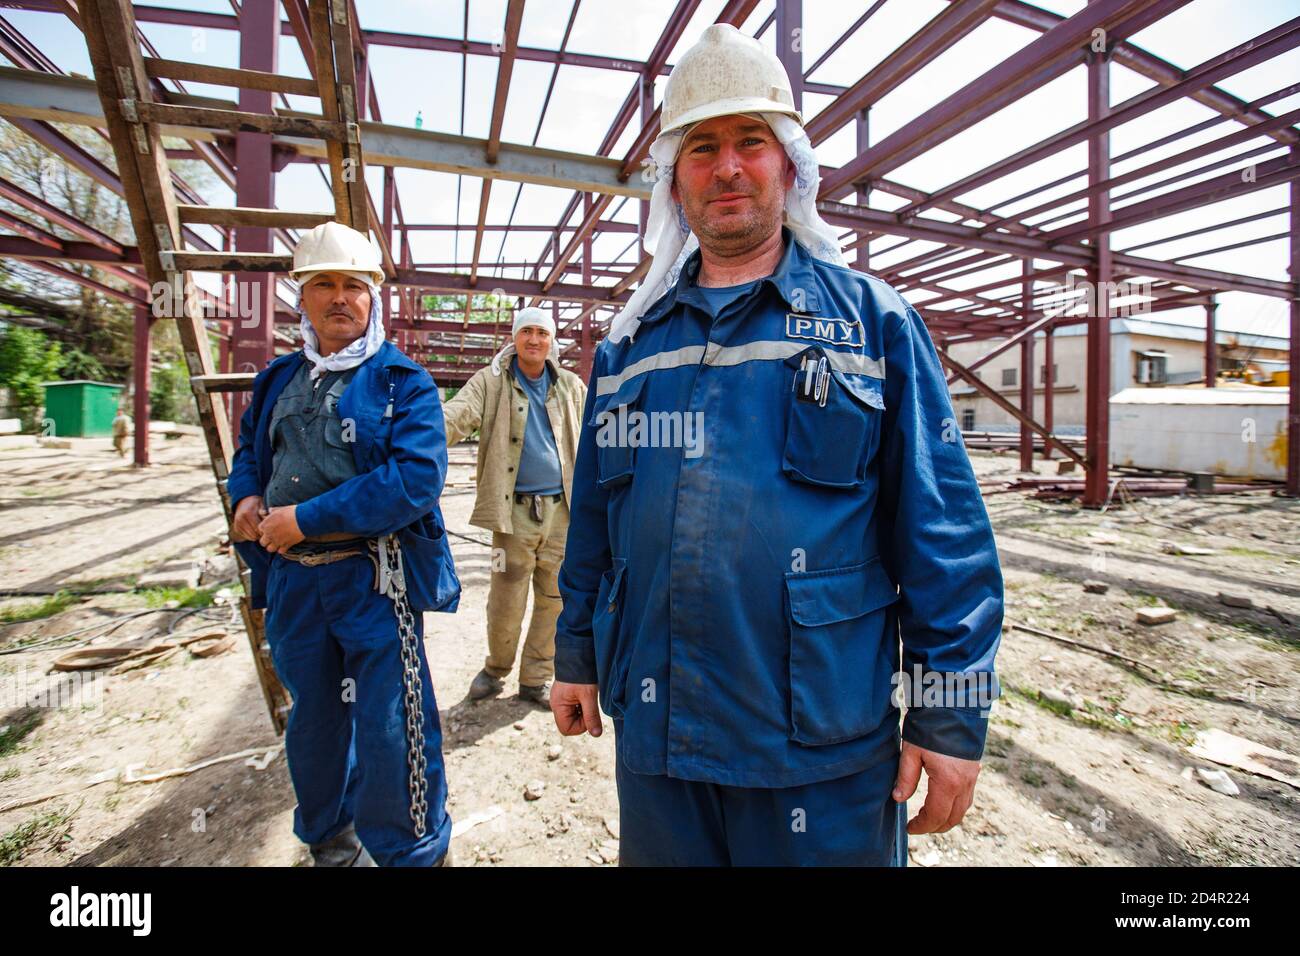 Shymkent/Kazakhstan - April 27 2012: Construction of new industrial building. Workers posing on the metal building structure background. Stock Photo